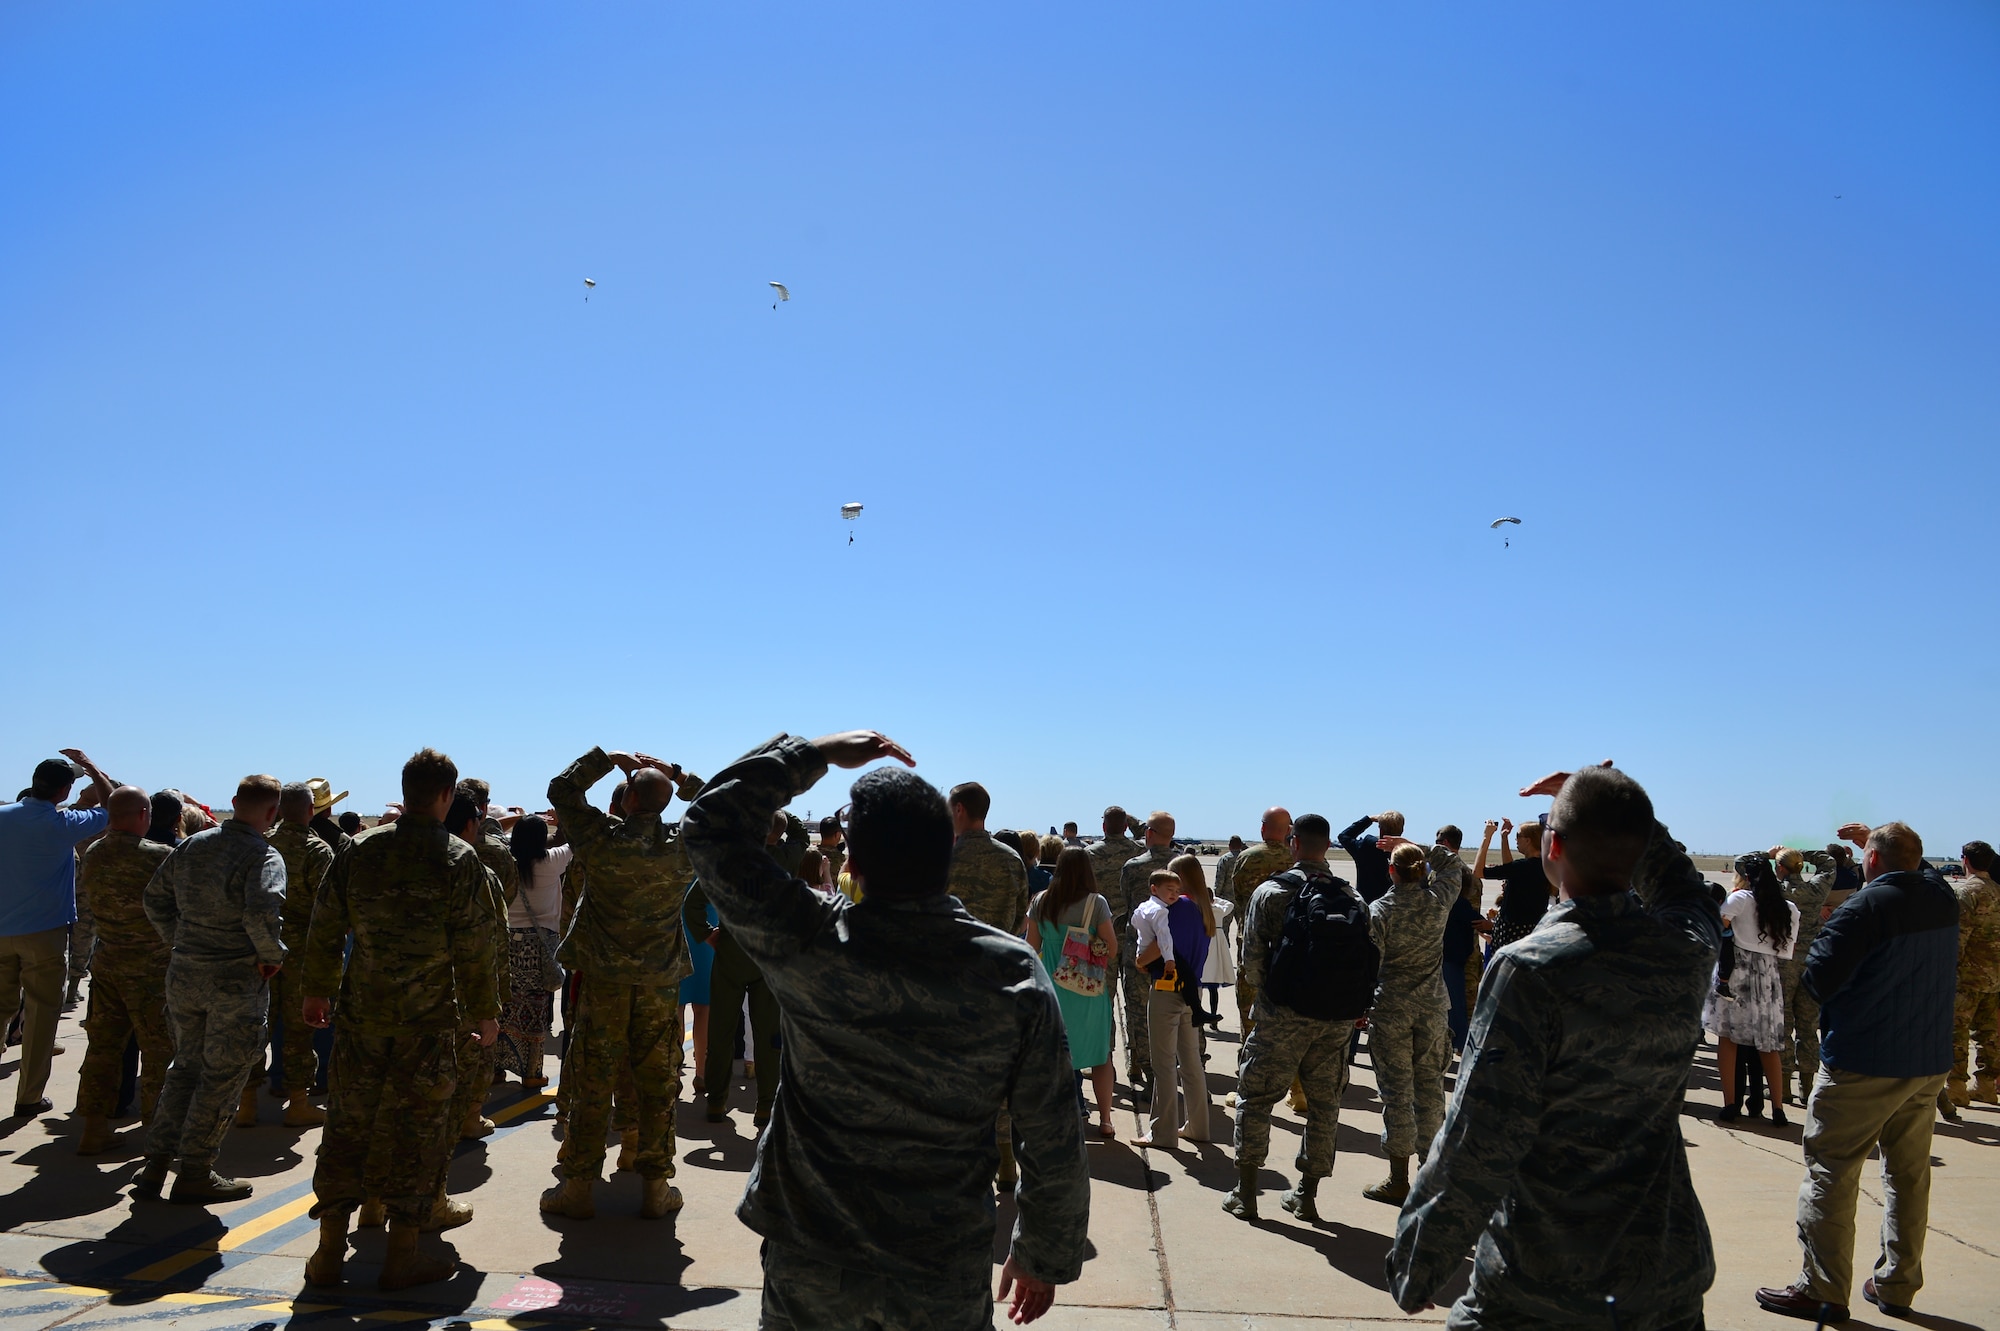 Spectators watch as members of the 26th Special Tactics Squadron parachute onto the flightline, April 24, 2014 at Cannon Air Force Base, N.M. The 26 STS, formerly Detachment 1 of the 720th Special Tactics Group, Hurlburt Field, Fla., is a newly activated squadron based at Cannon. (U.S. Air Force photo/ Senior Airman Eboni Reece)